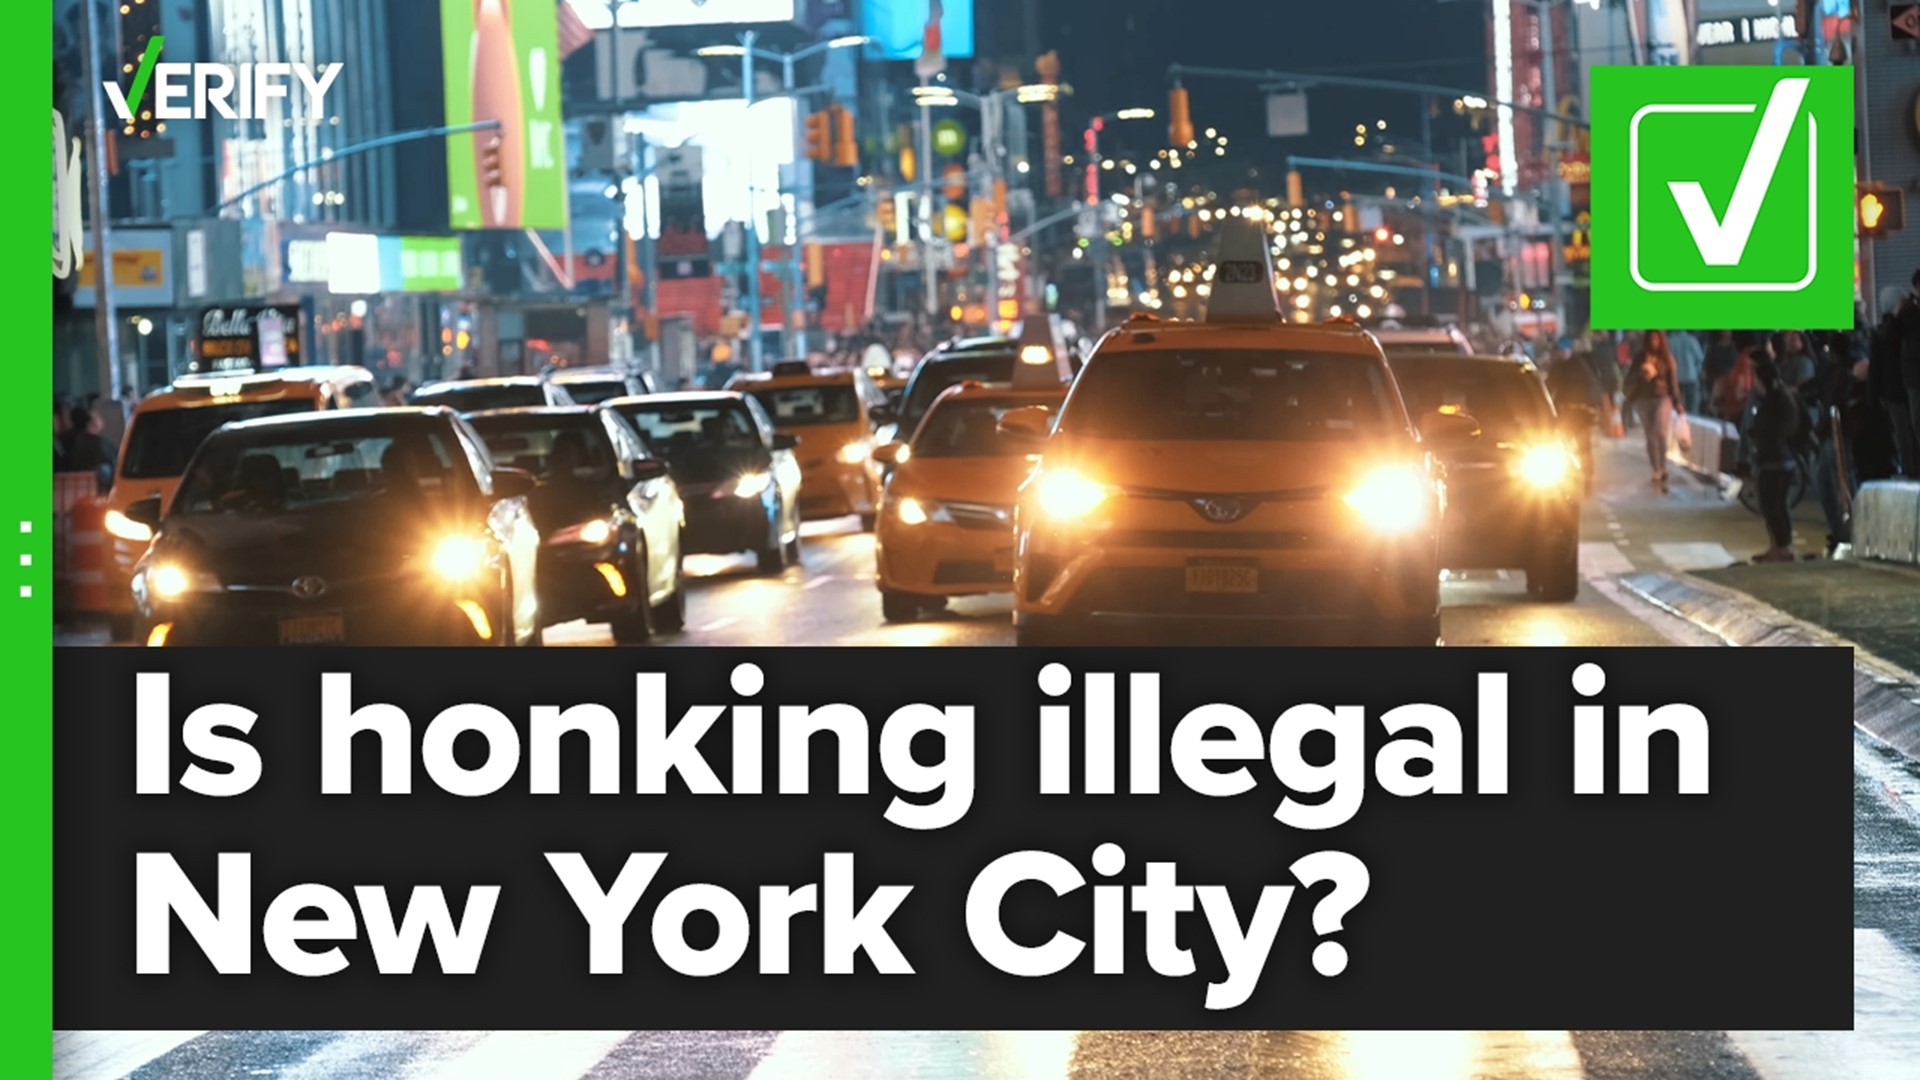 Is it illegal to honk your horn in New York City, except for in an emergency? Sources from the city’s State Comptroller and an NYU study confirm this is false.